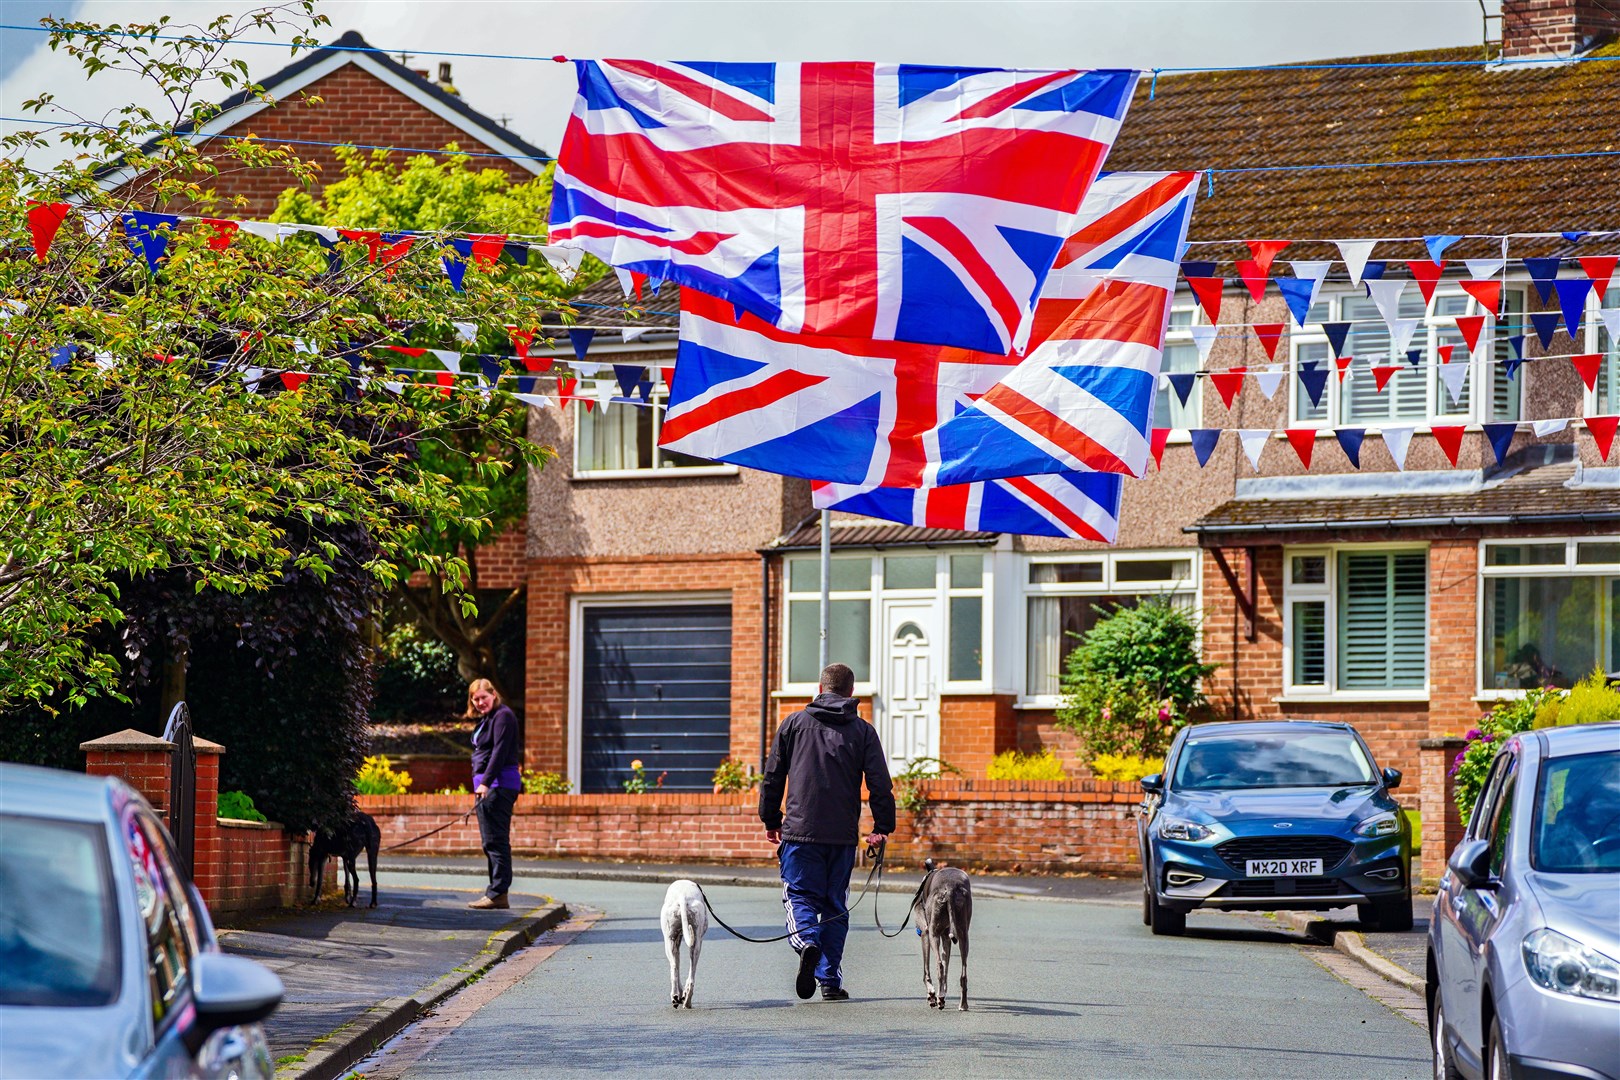 Fairlie Drive in Rainhill, Merseyside is decorated ahead of the Platinum Jubilee celebrations (Peter Byrne/PA)